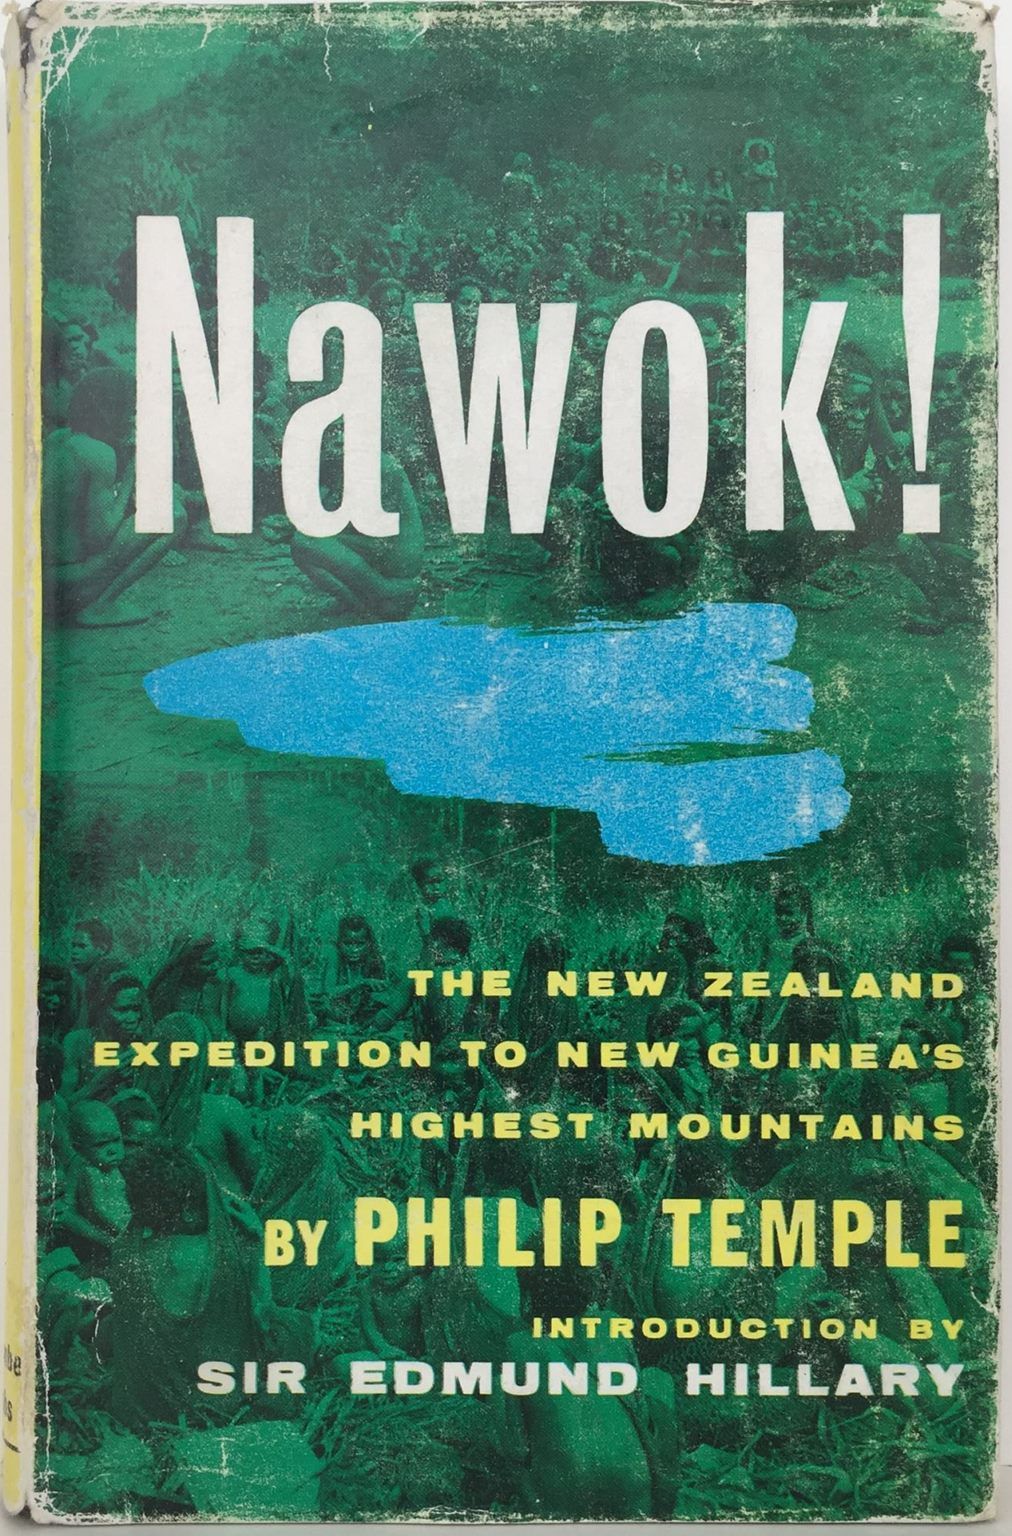 NAWOK! The New Zealand Expedition To New Guinea's Highest Mountains